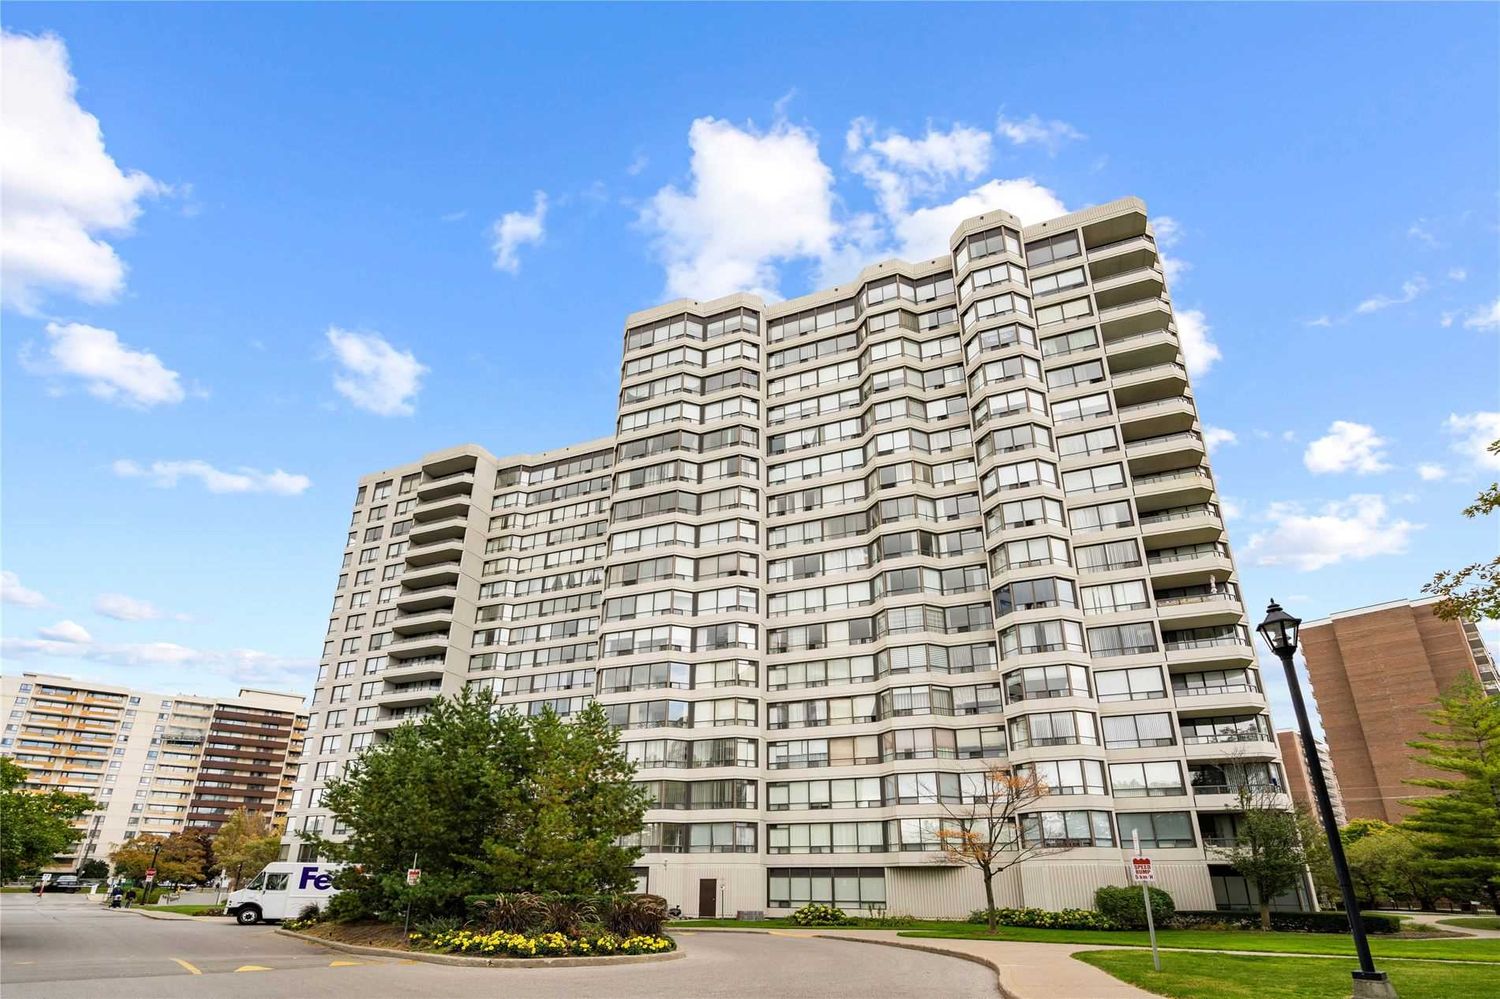 1101 Steeles Avenue W. Primrose Towers I Condos is located in  North York, Toronto - image #1 of 2